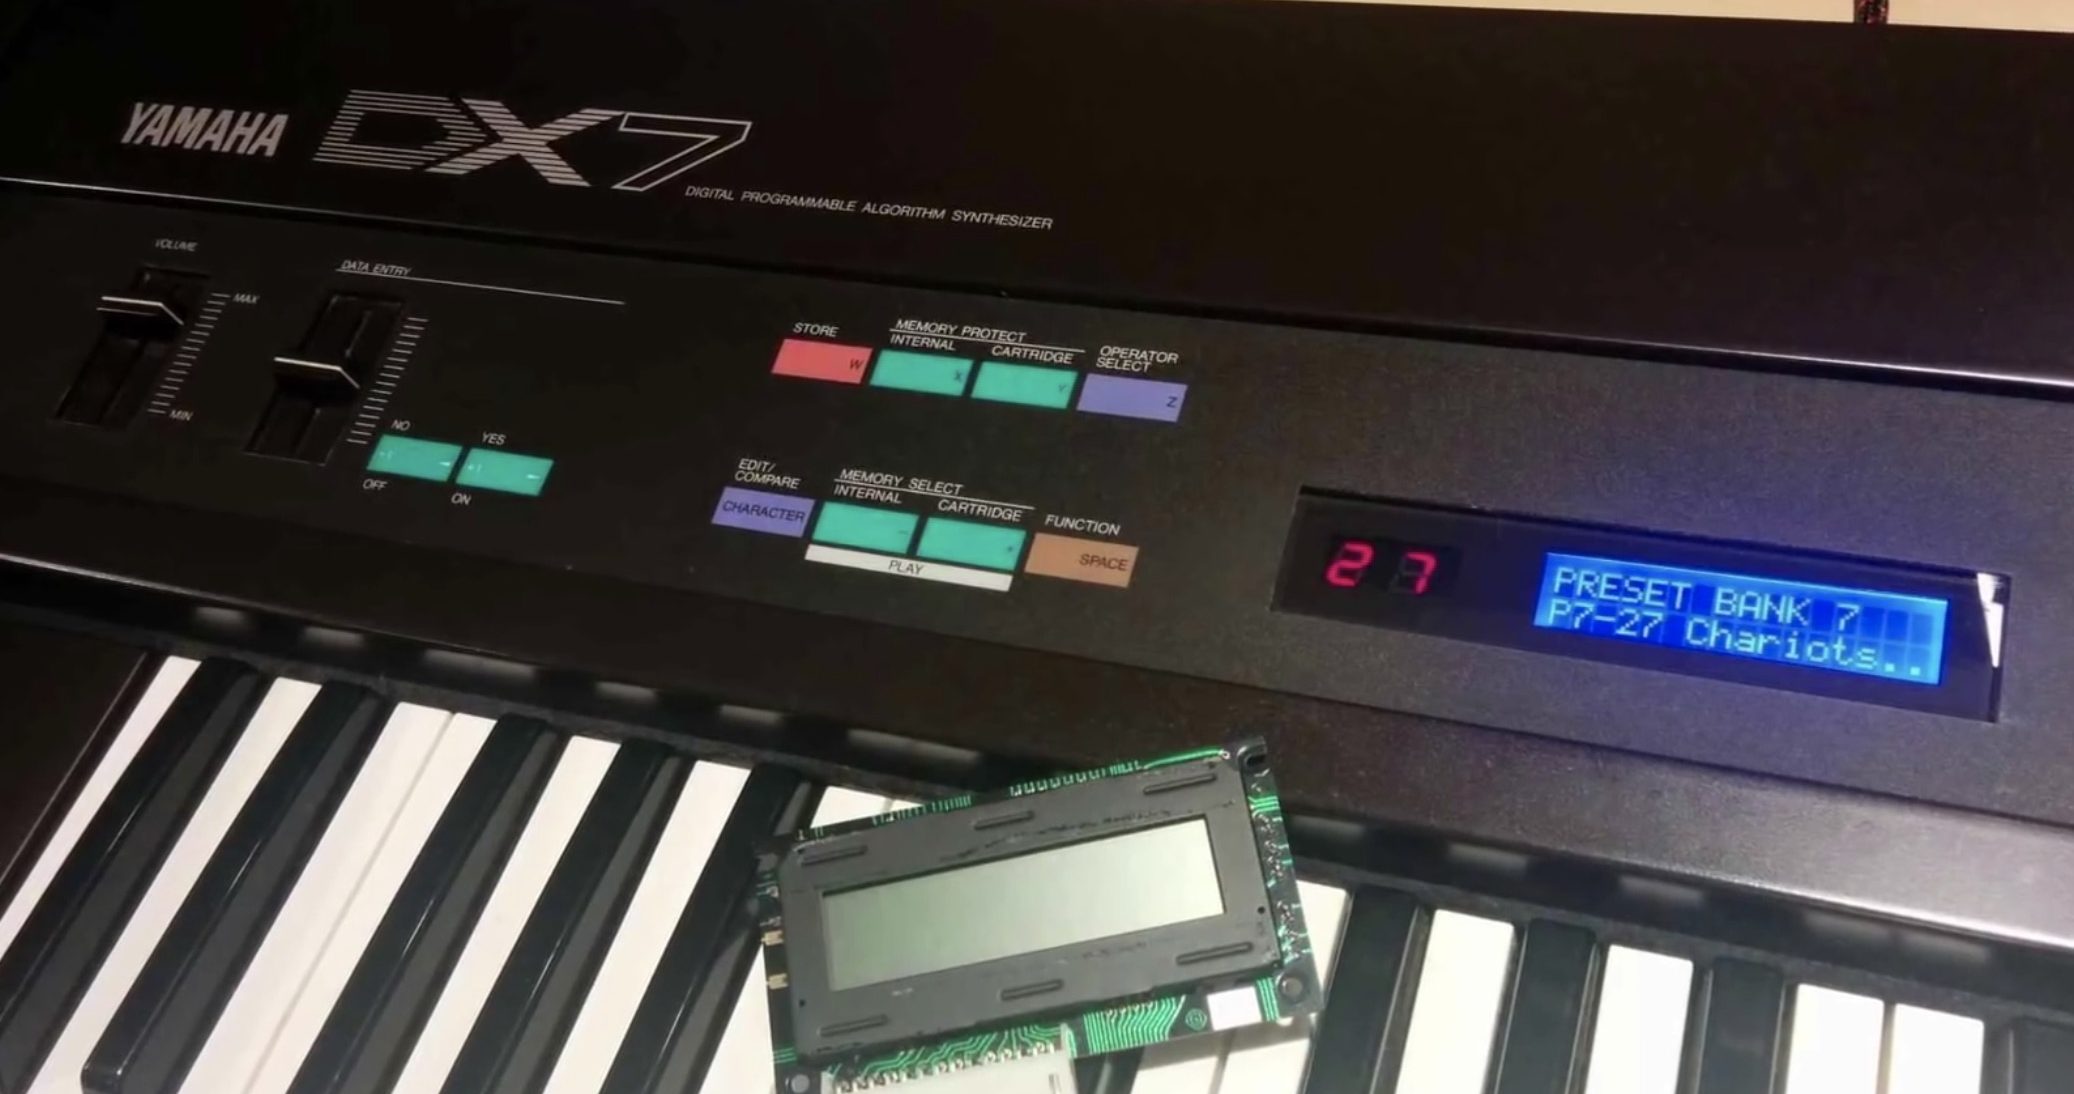 Yamaha Dx7 The Synthesizer That Defined The 80s Synthtopia